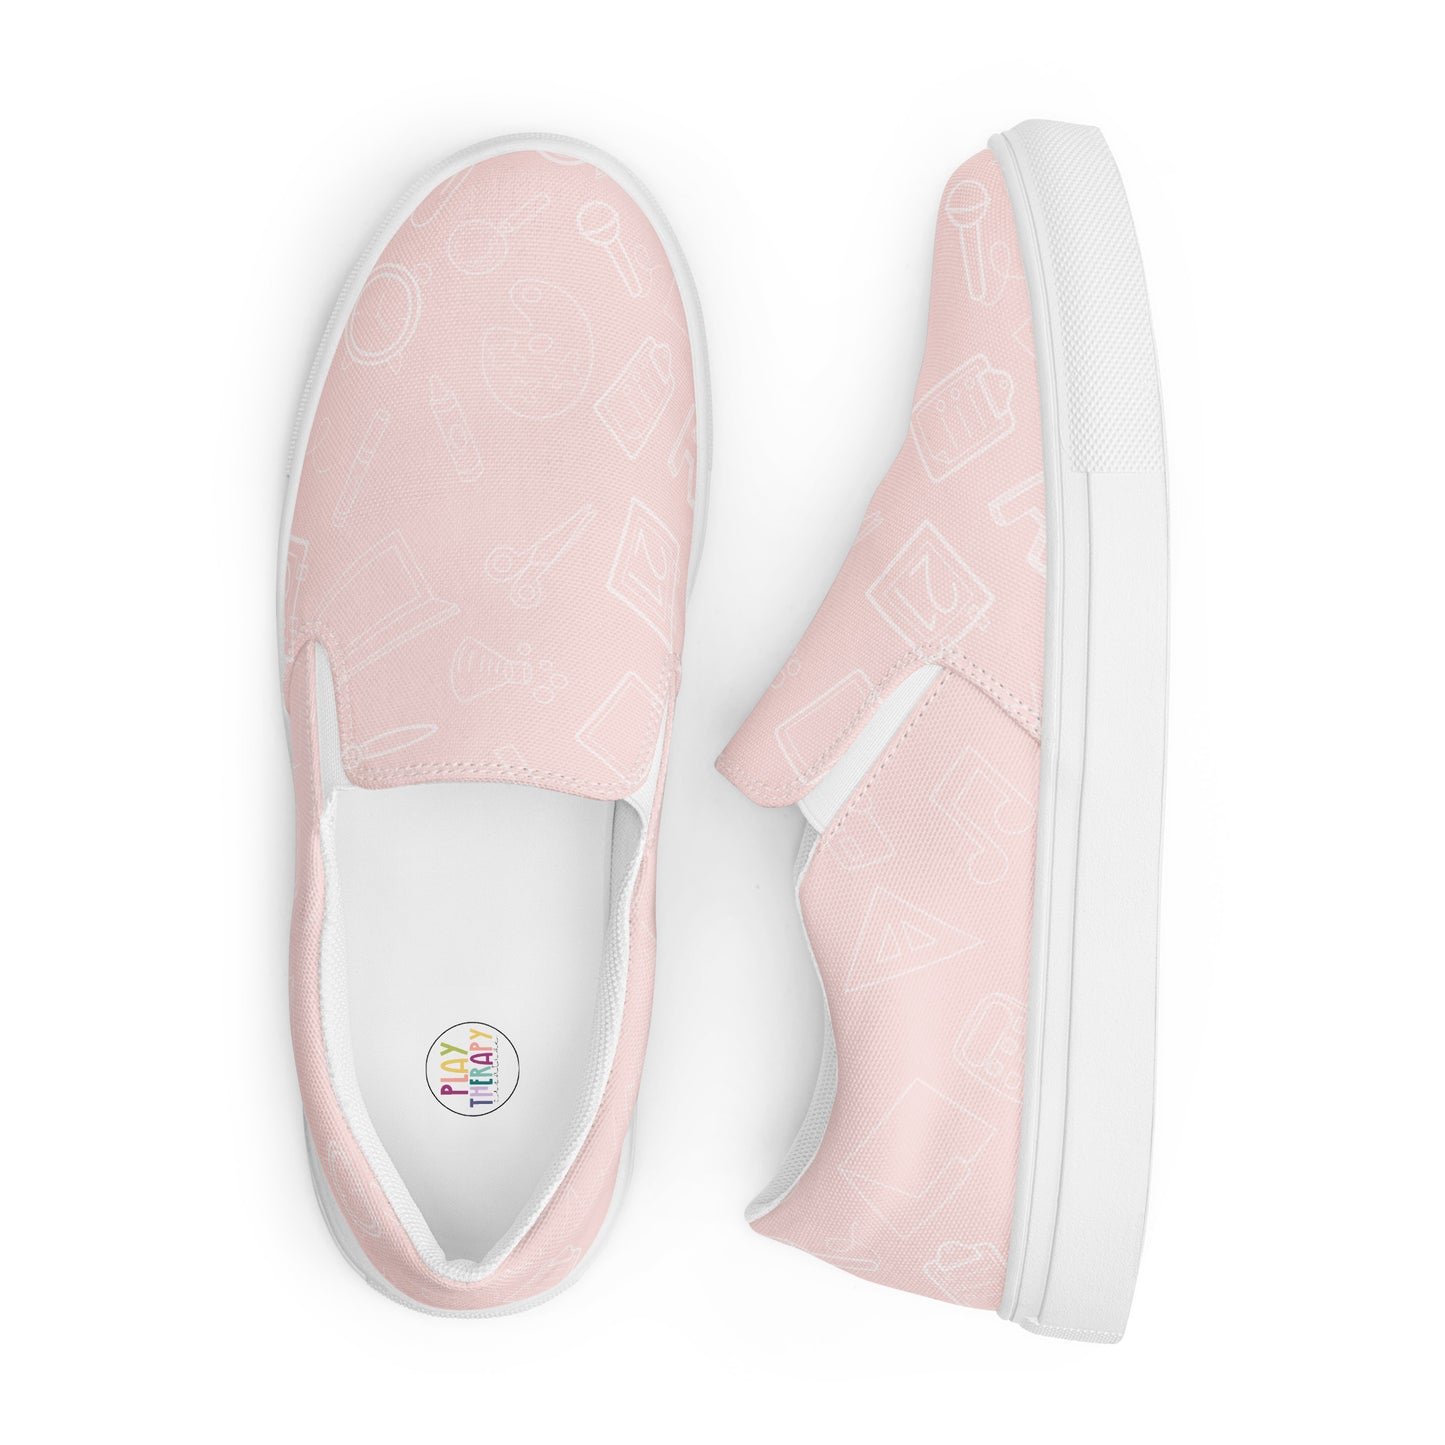 Pink Elementary Doodles Slip-on Canvas Shoes (Women's Sizes)